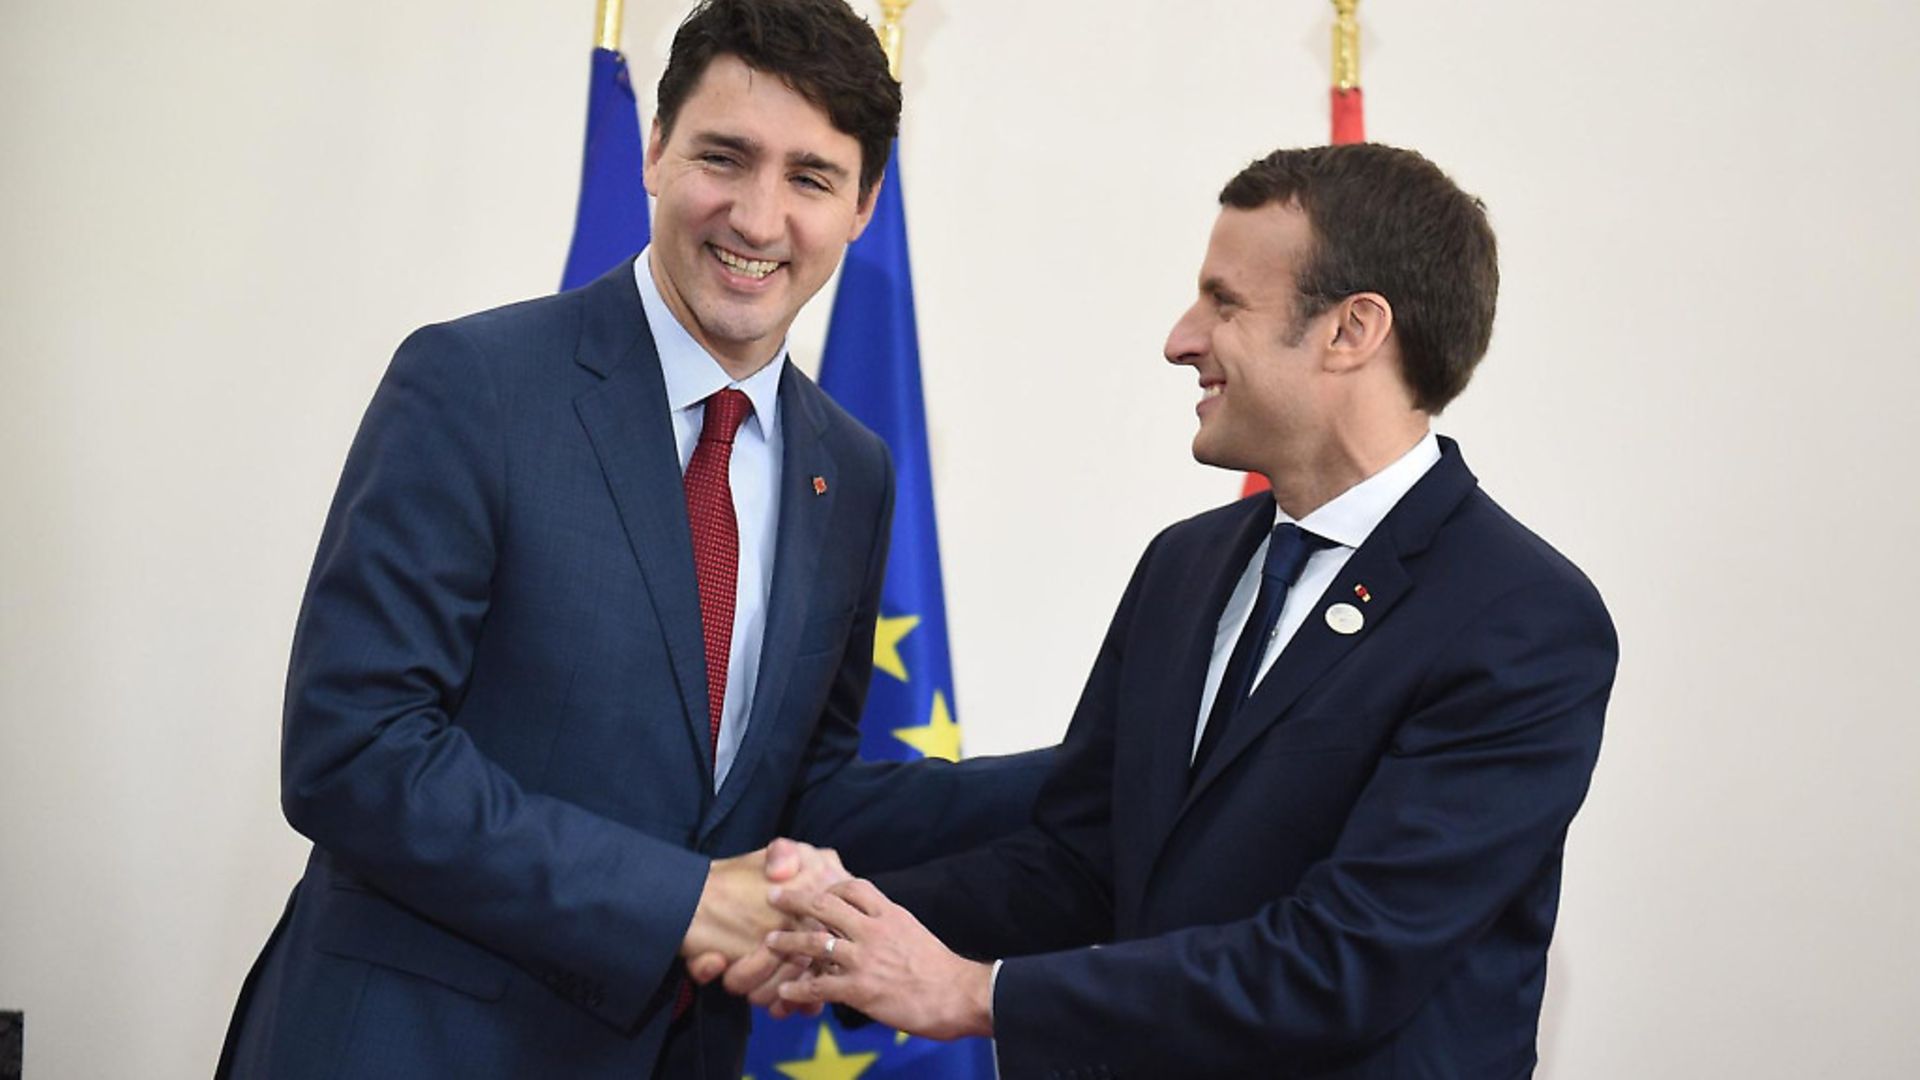 Canadian Prime Minister Justin Trudeau and French President Emmanuel Macron. Photograph: Maxppp/PA Images. - Credit: Maxppp/PA Images